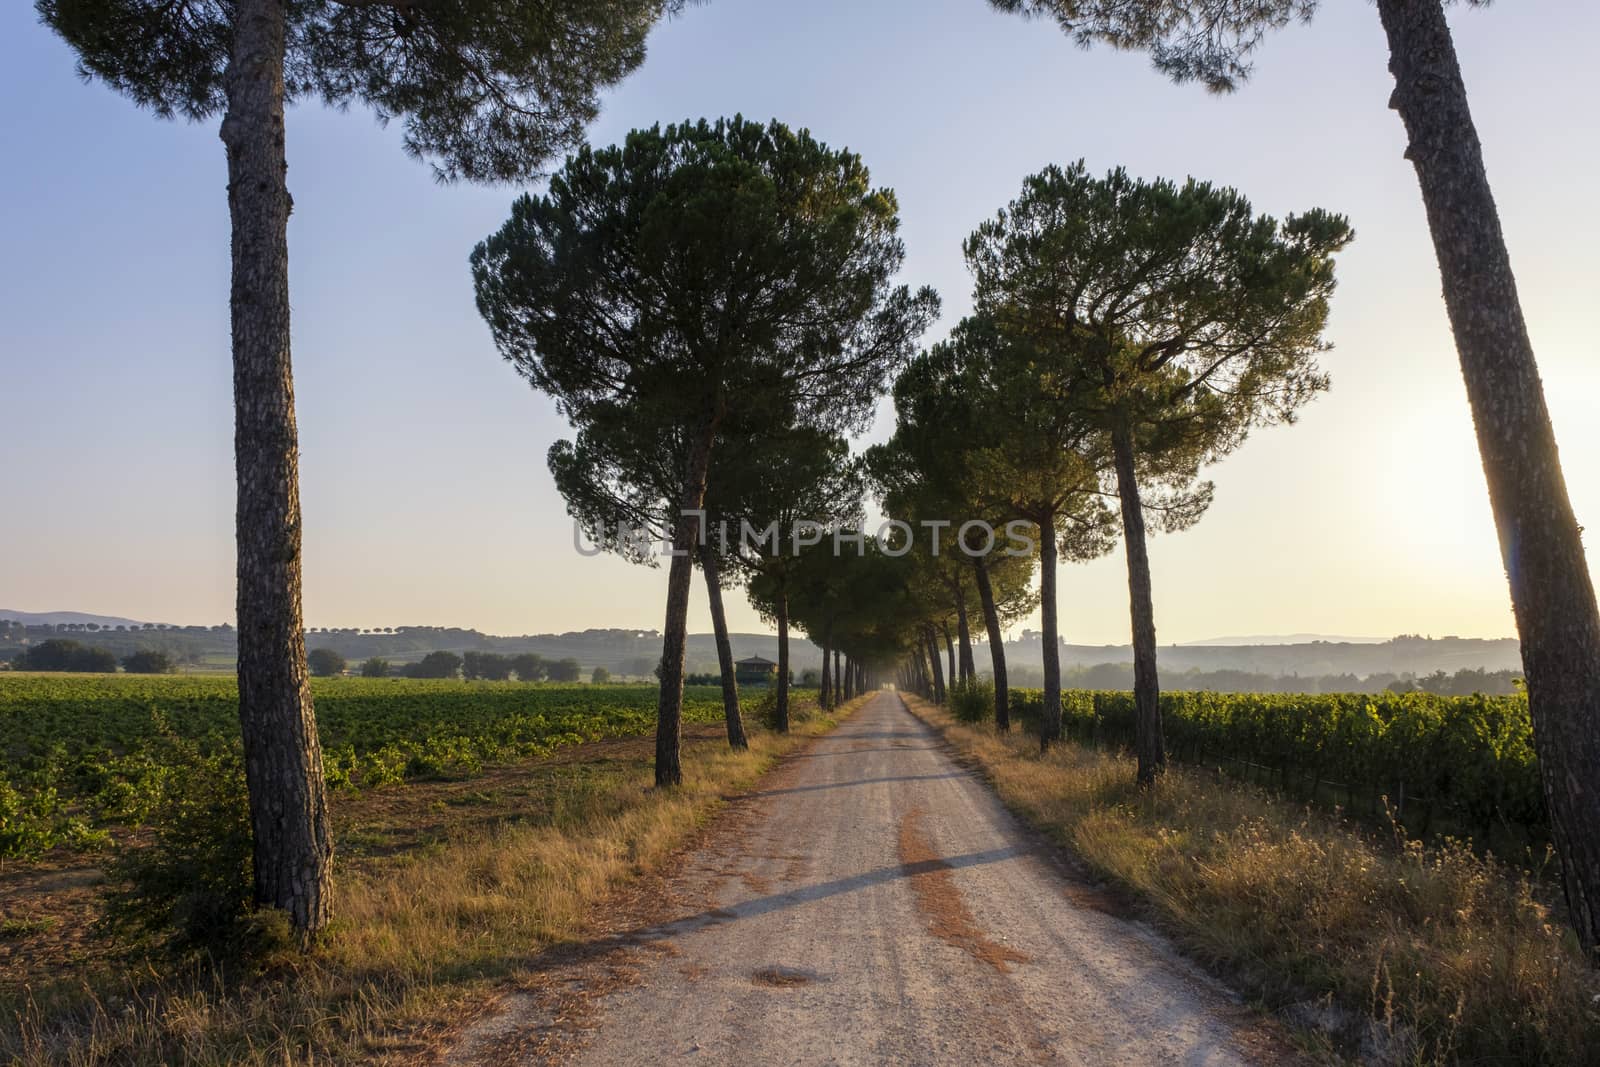 Travel in Tuscany. Beautiful and idyllic landscape of a lane of cypresses in the Tuscan countryside in Italy.